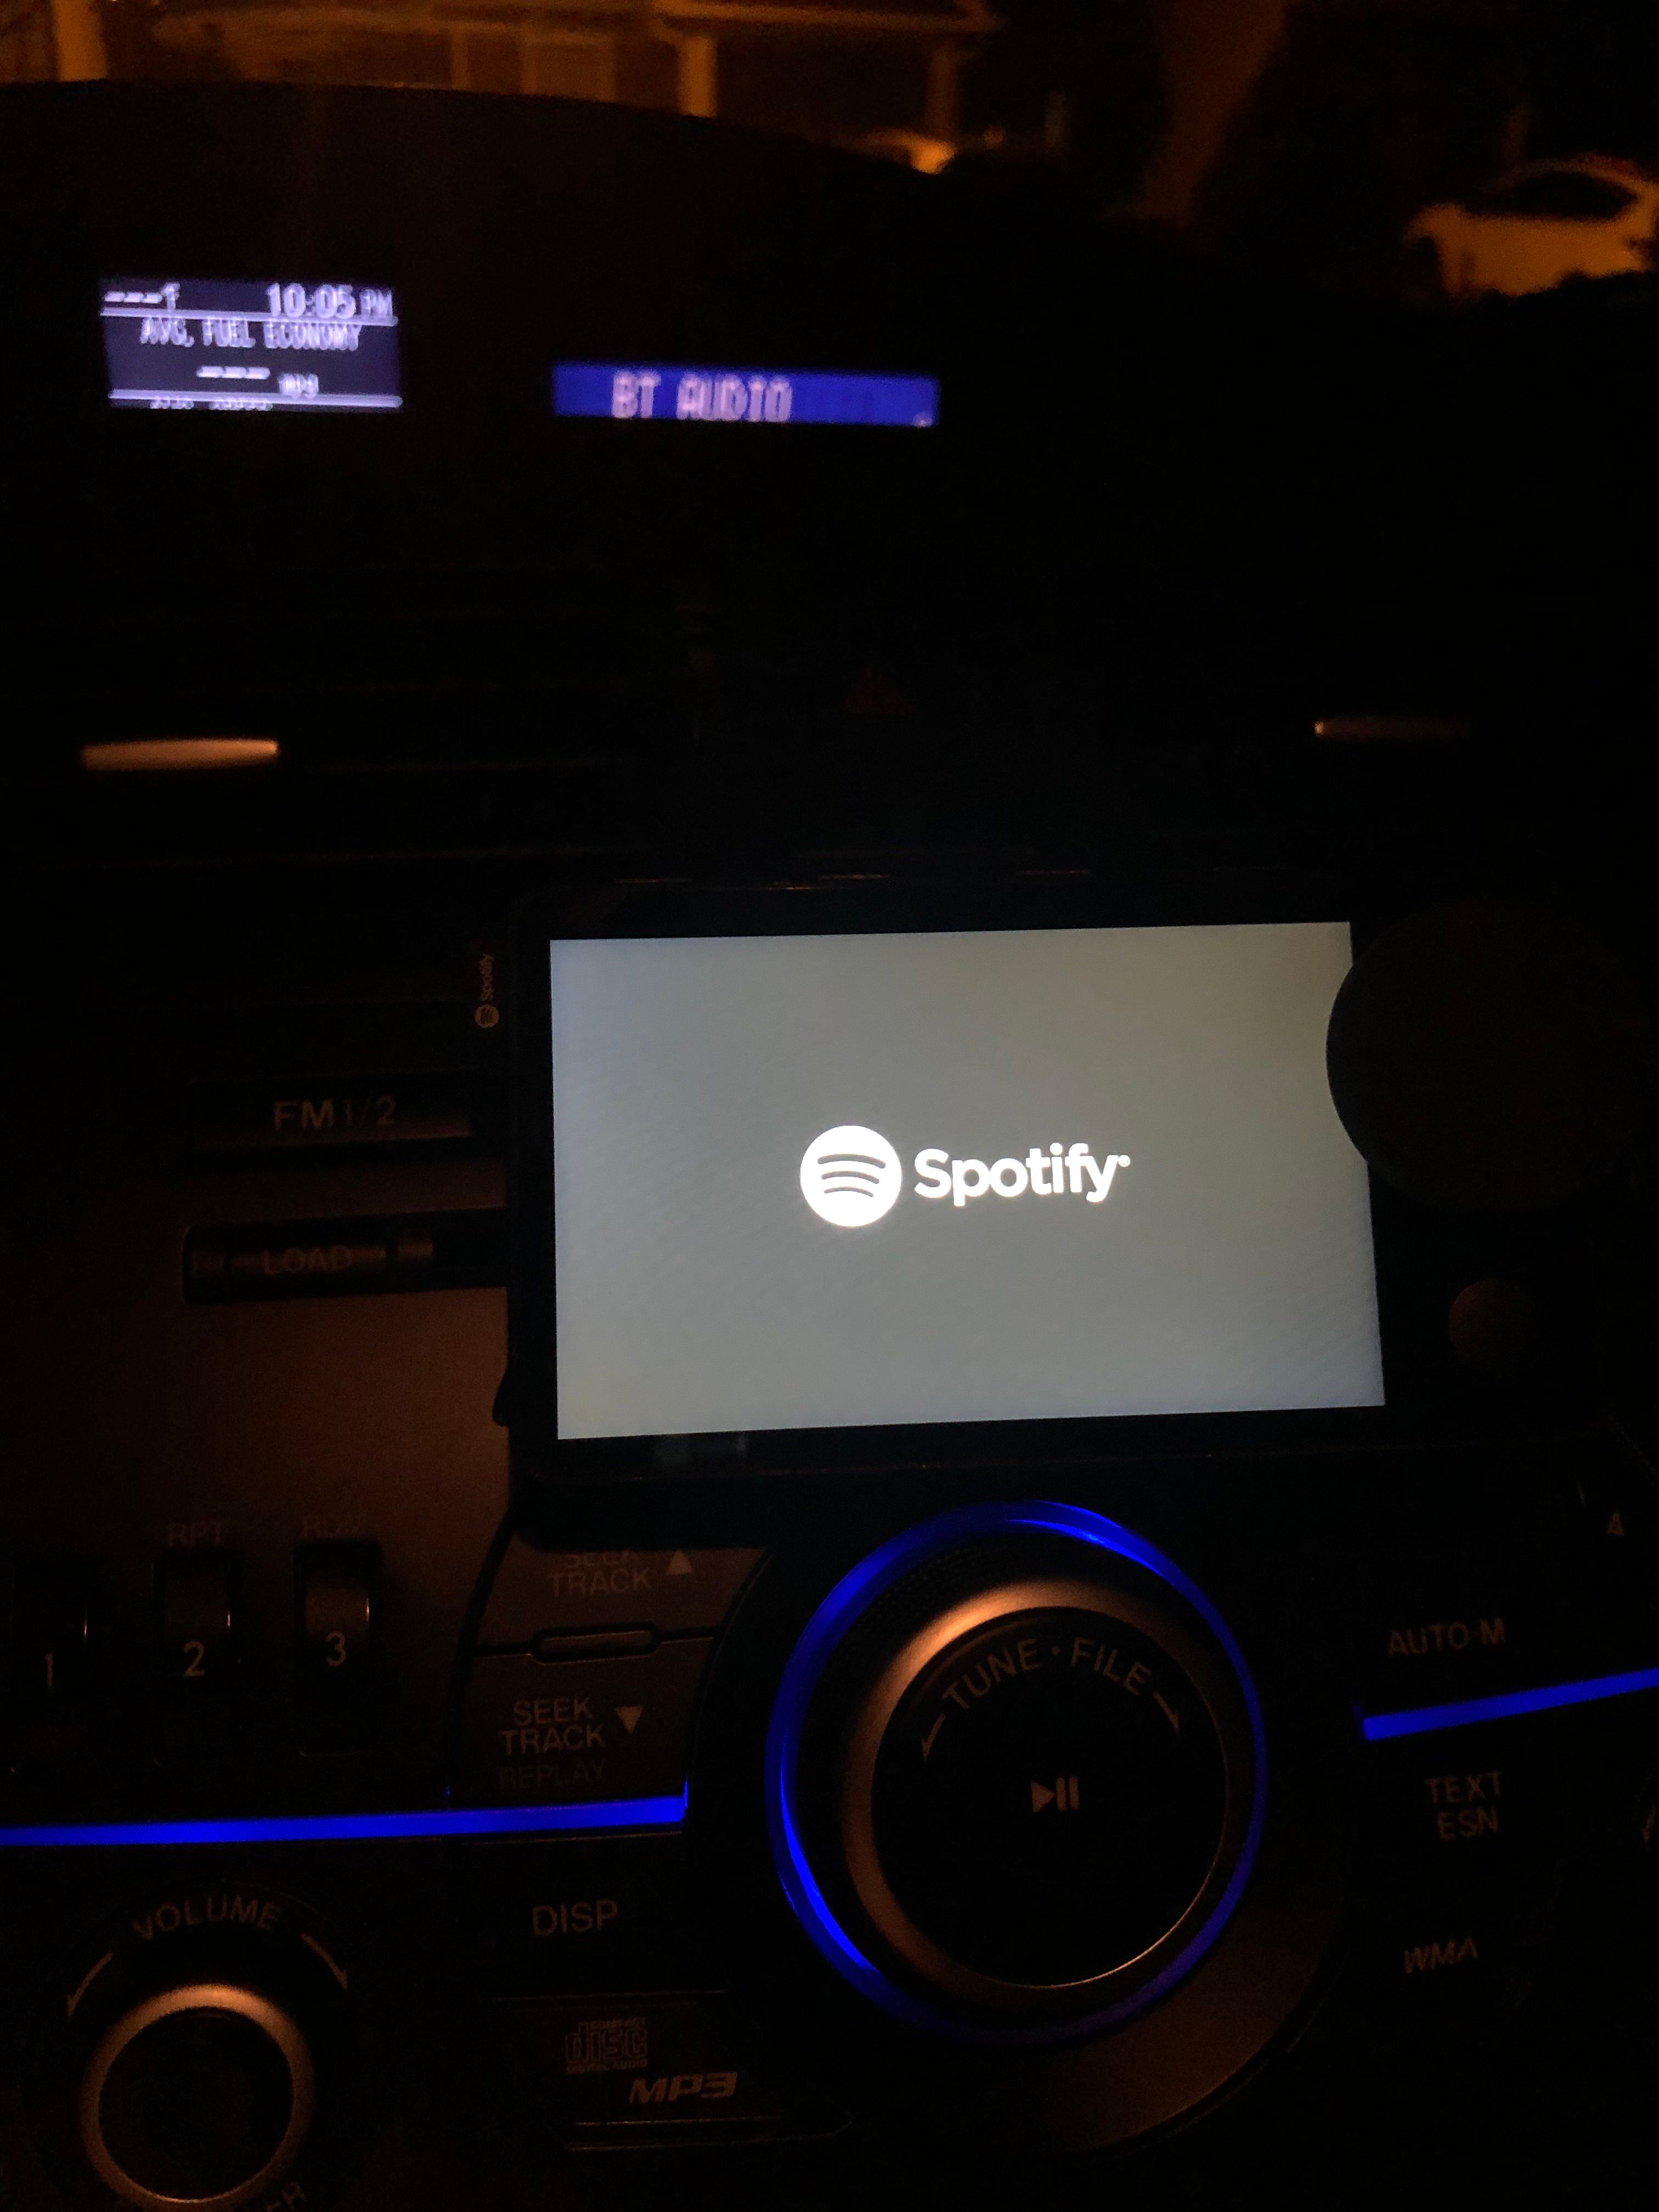 Car Thing Stuck in Boot loop - The Spotify Community